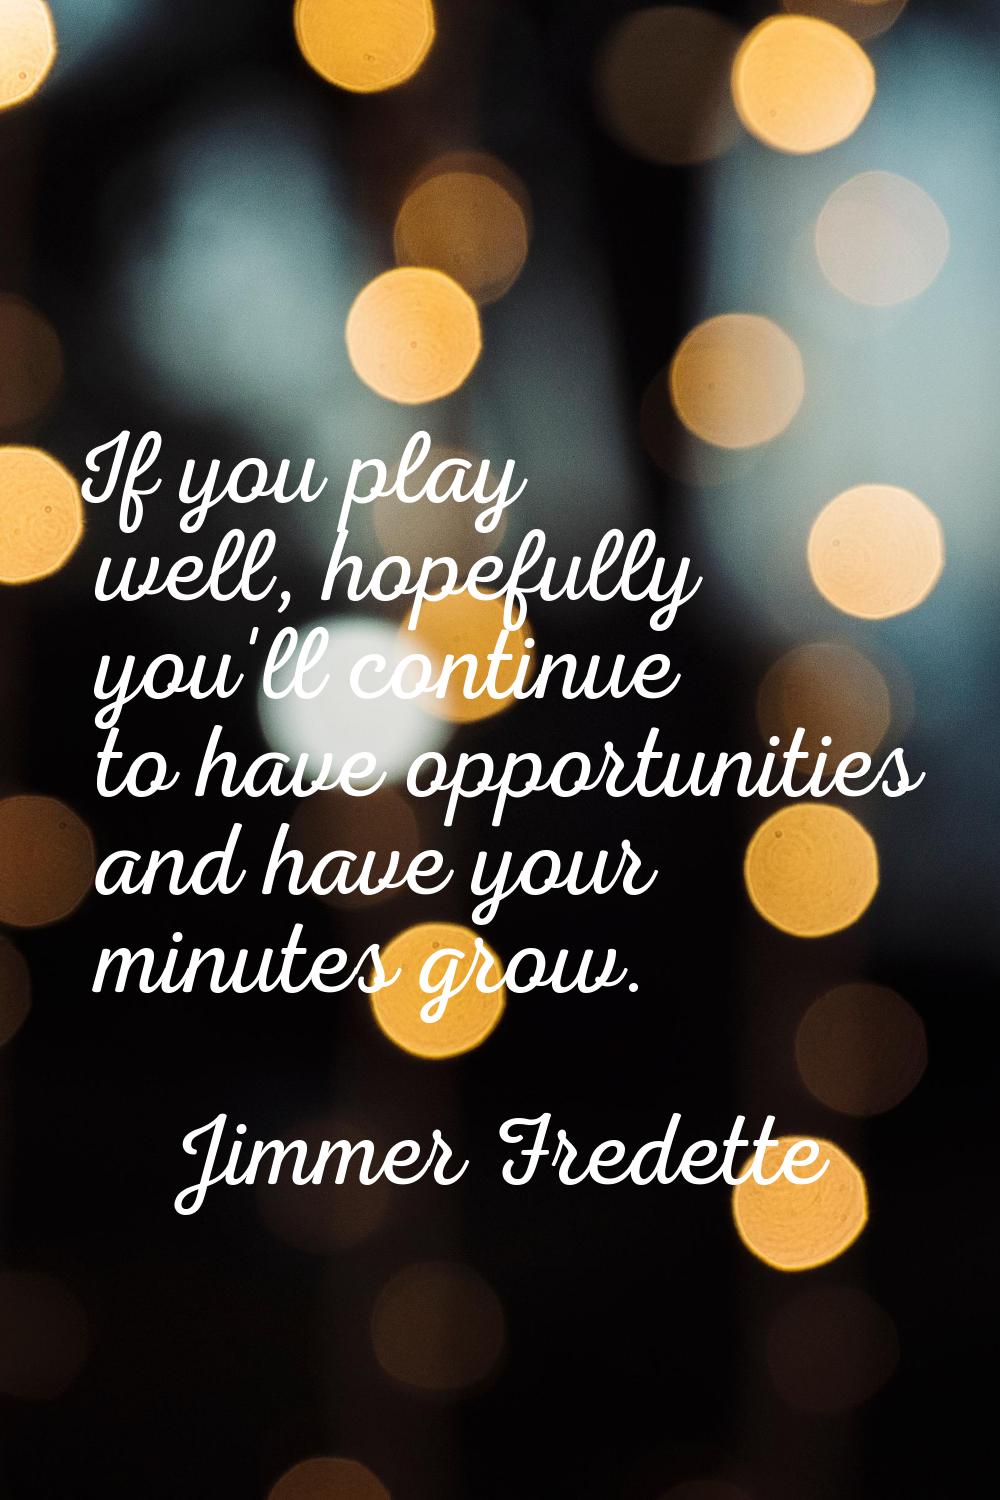 If you play well, hopefully you'll continue to have opportunities and have your minutes grow.